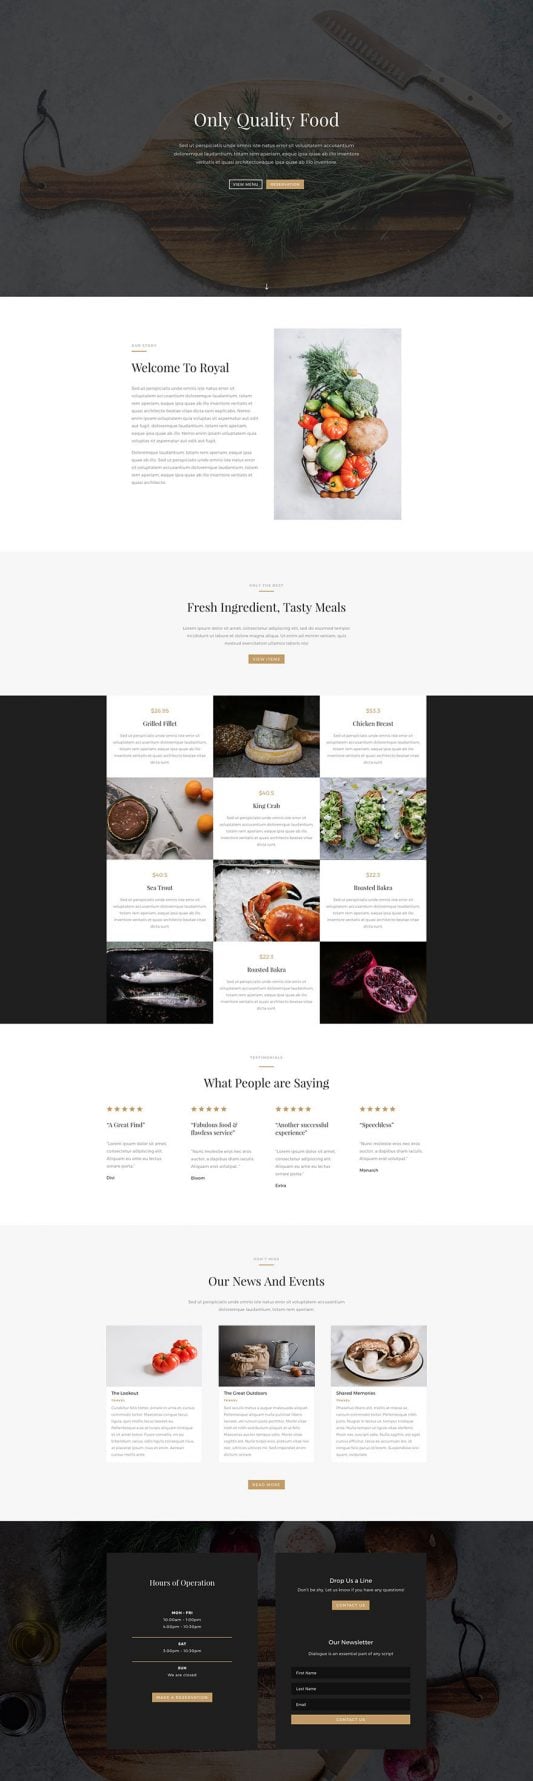 Divi Layouts by Elegant Themes